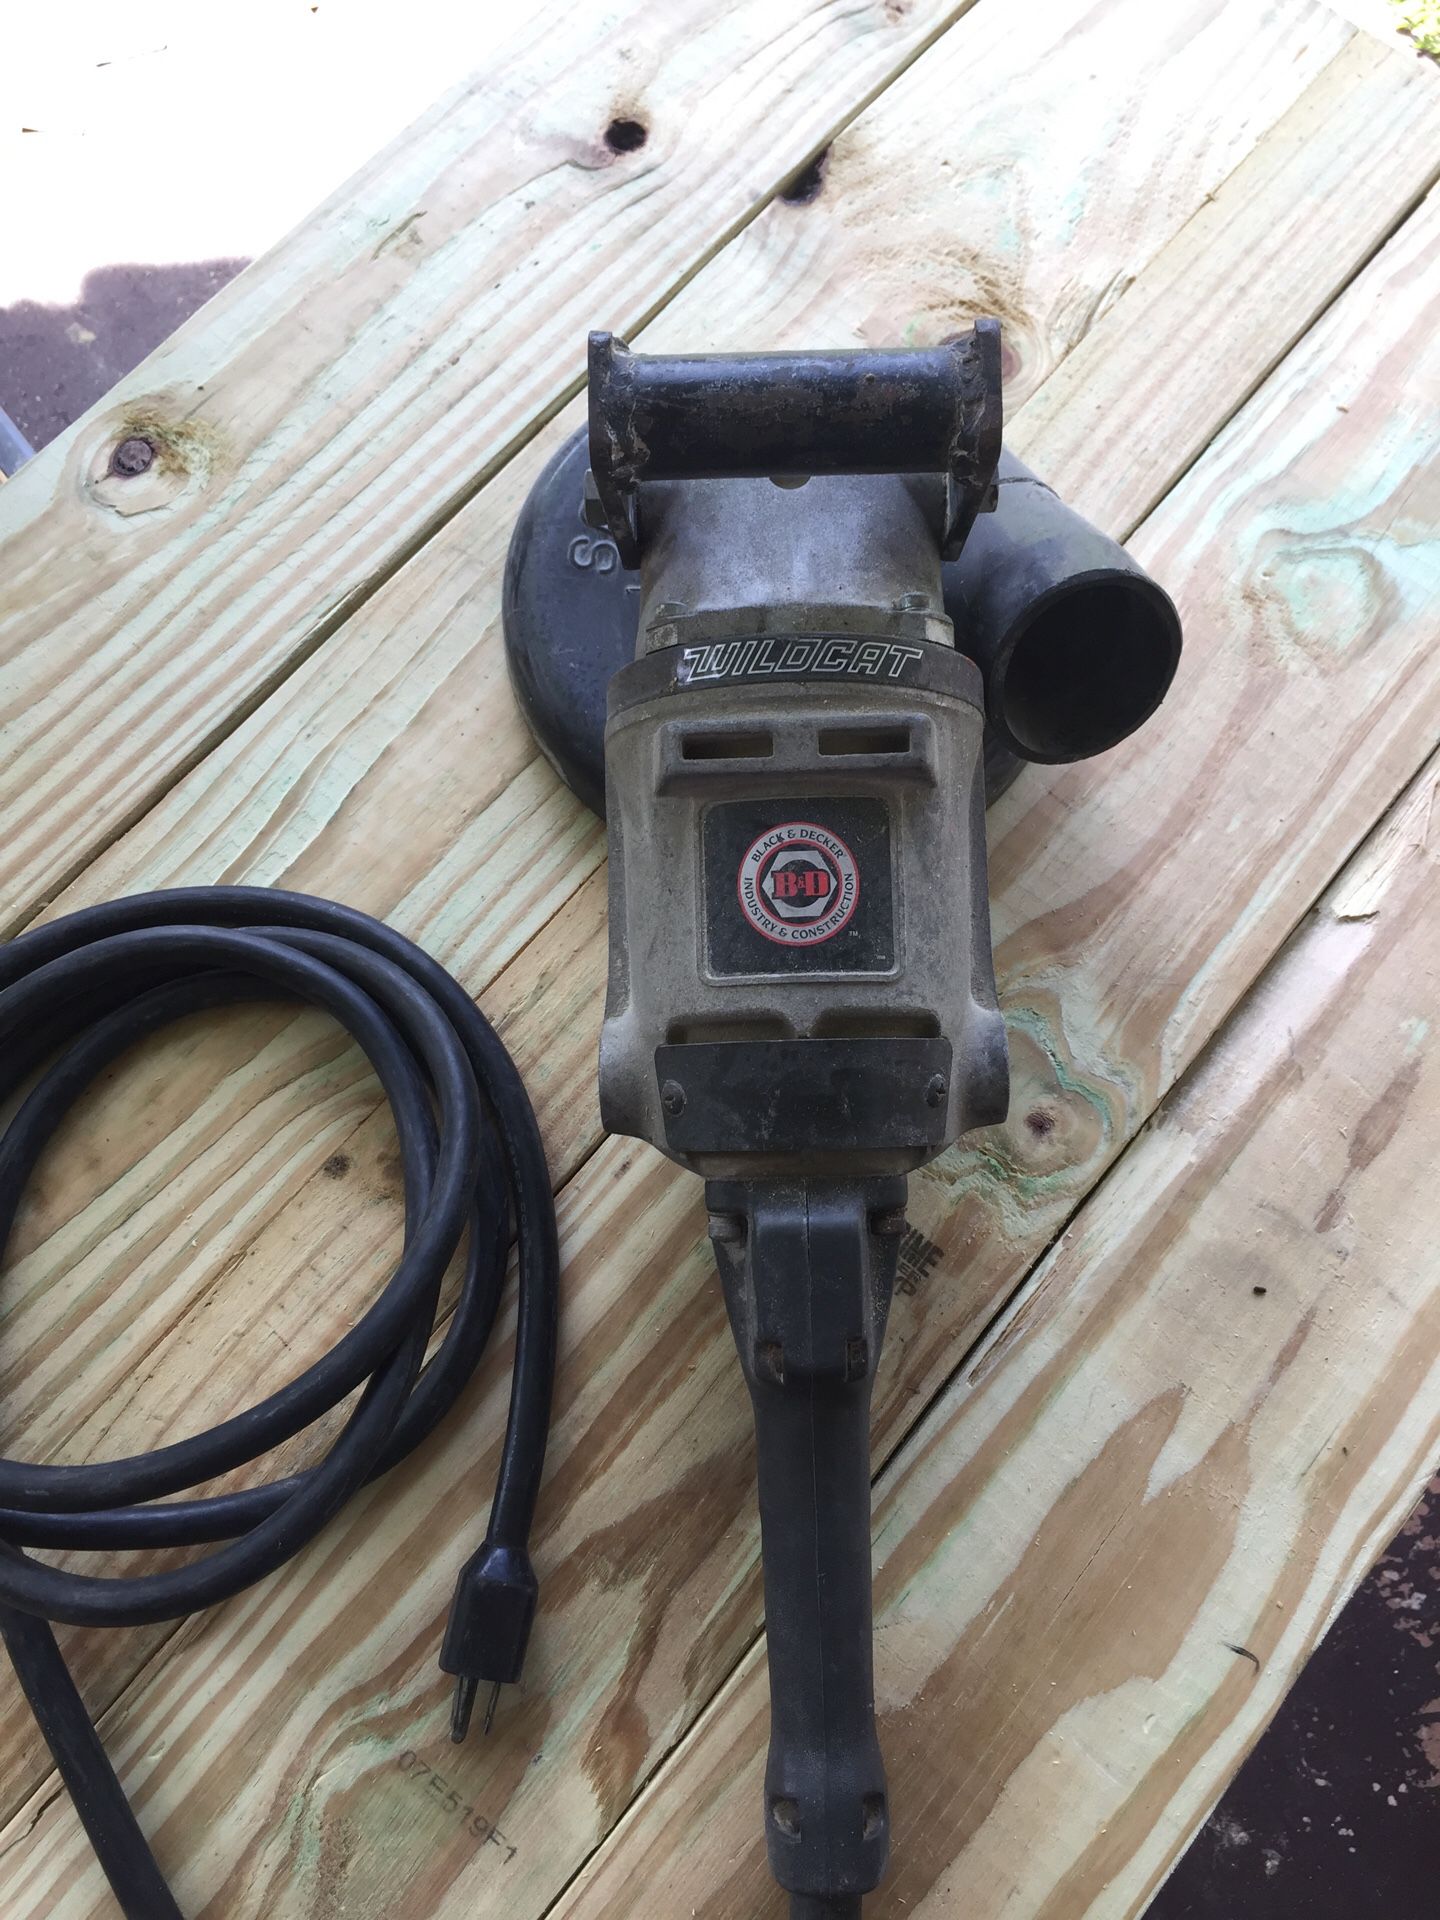 Angle Grinder - Black and Decker 7750 Type 3 for Sale in Boca